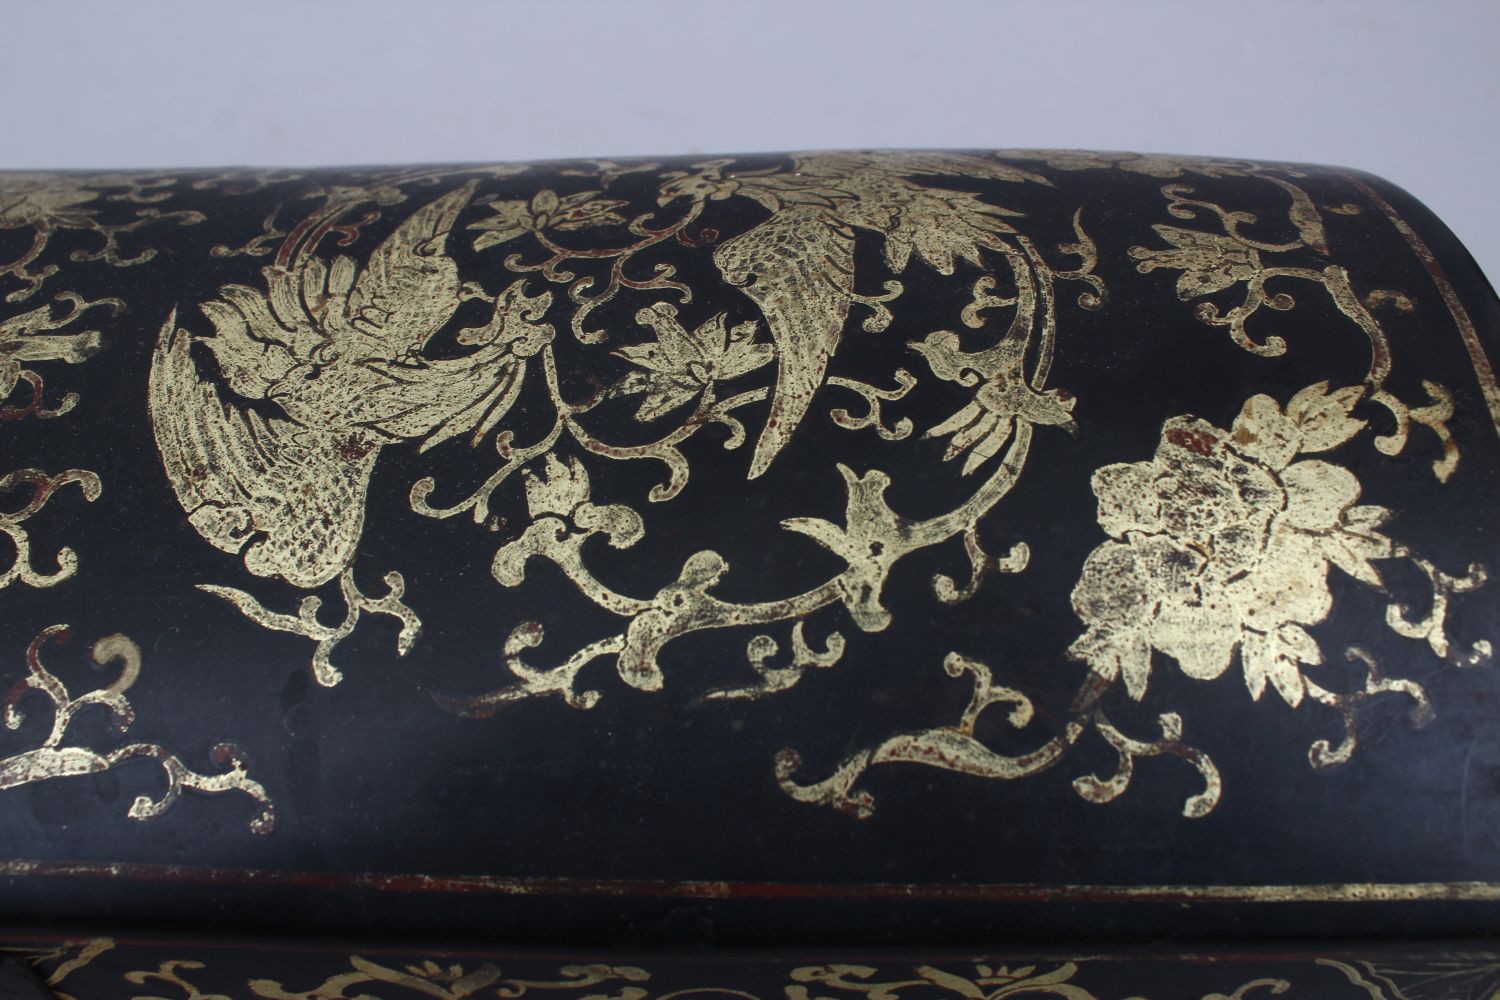 A GOOD 19TH CENTURY CHINESE LACQUER CHEST / BOX, the lacquer box with gilded decoration of dragons - Image 7 of 12